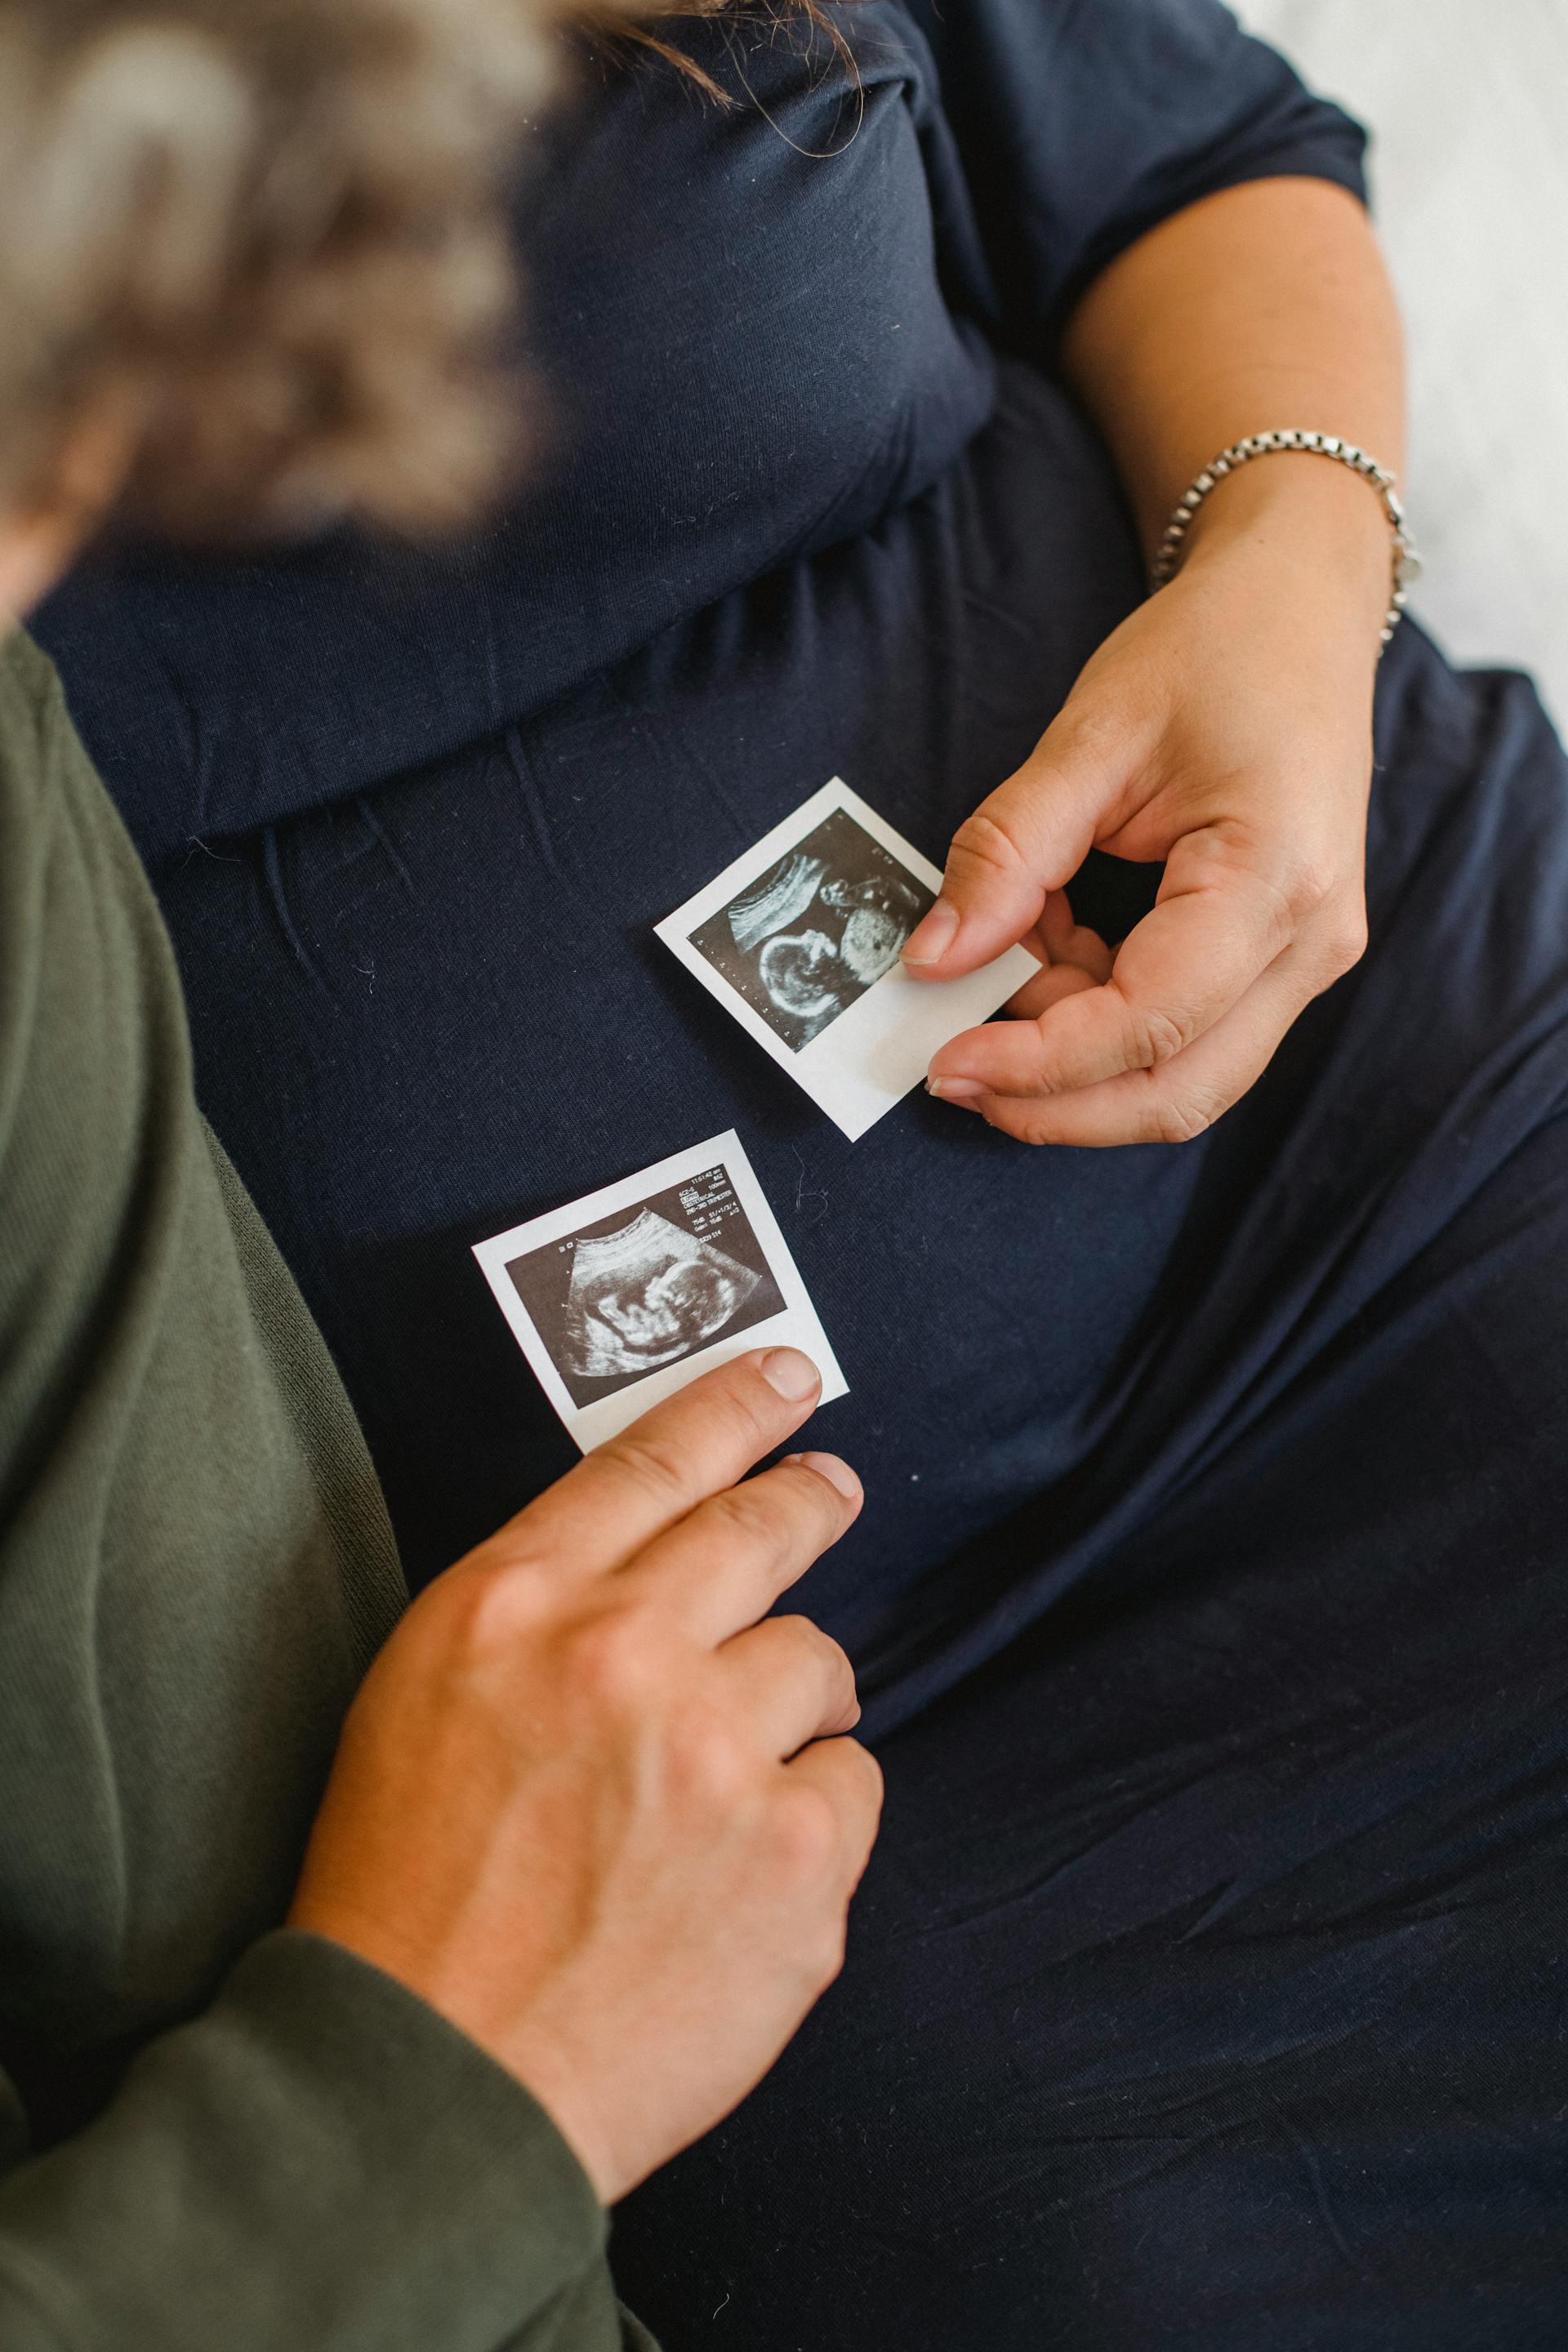 A couple holding two sonograms | Source: Pexels